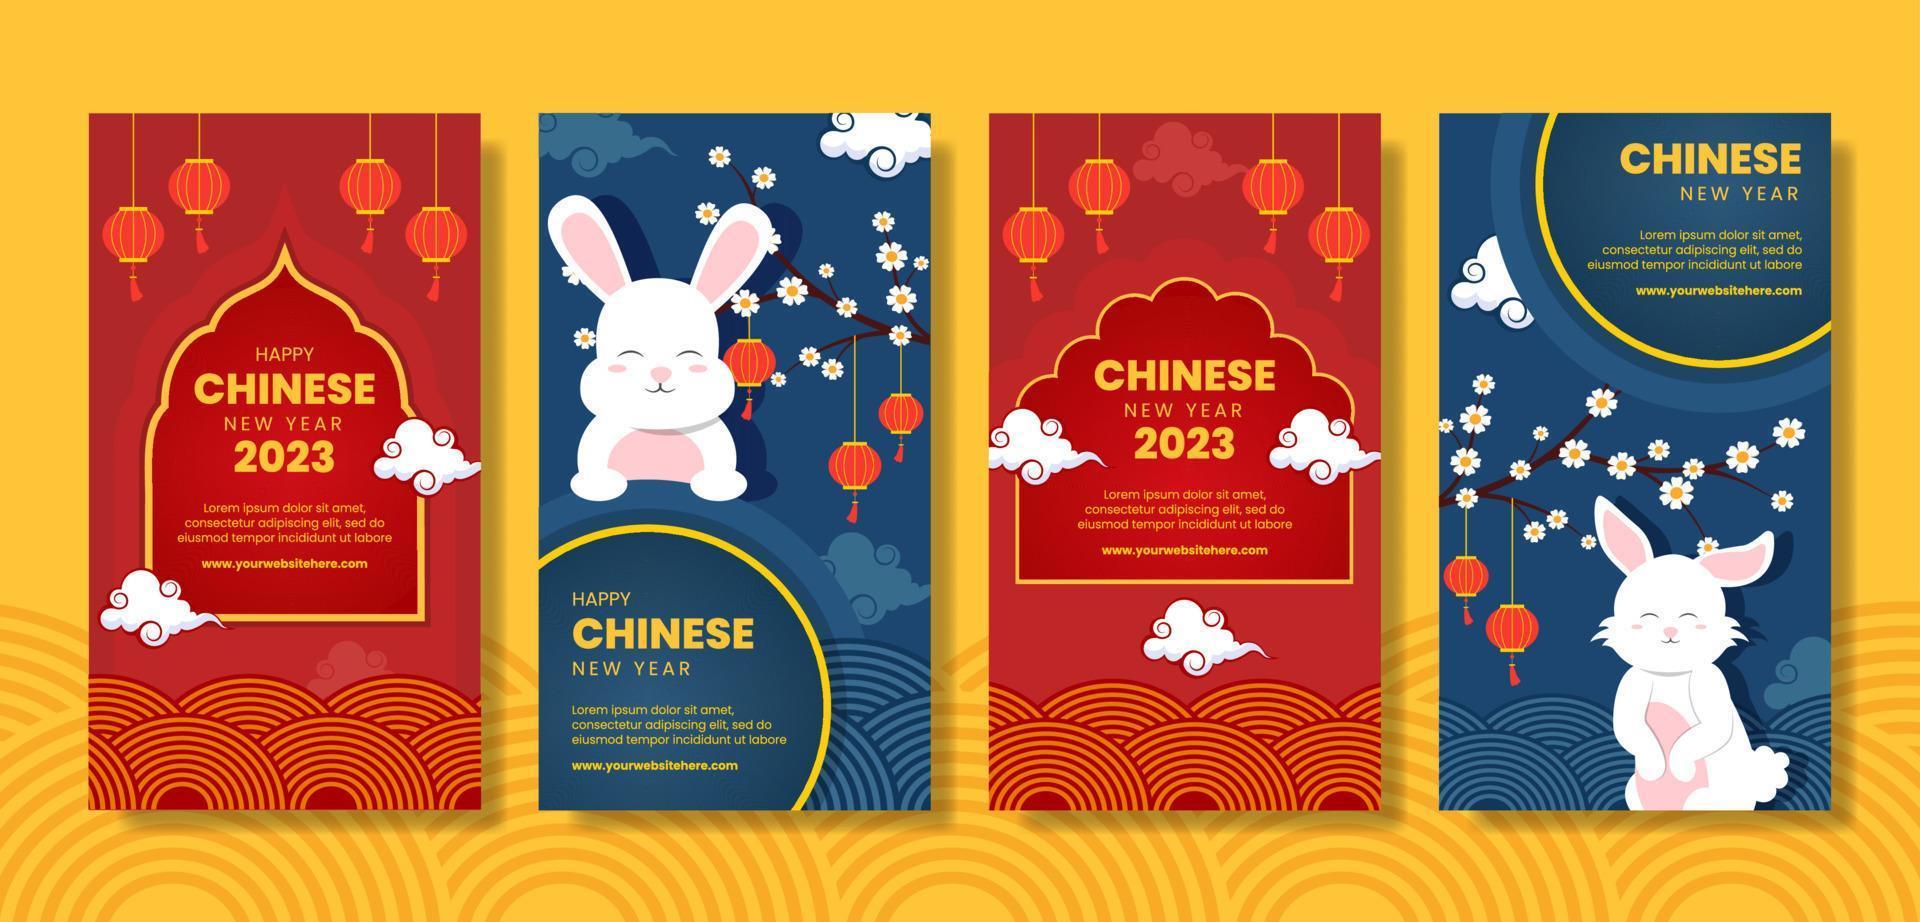 Happy Chinese New Year Social Media Stories Template Hand Drawn Cartoon Flat Illustration vector